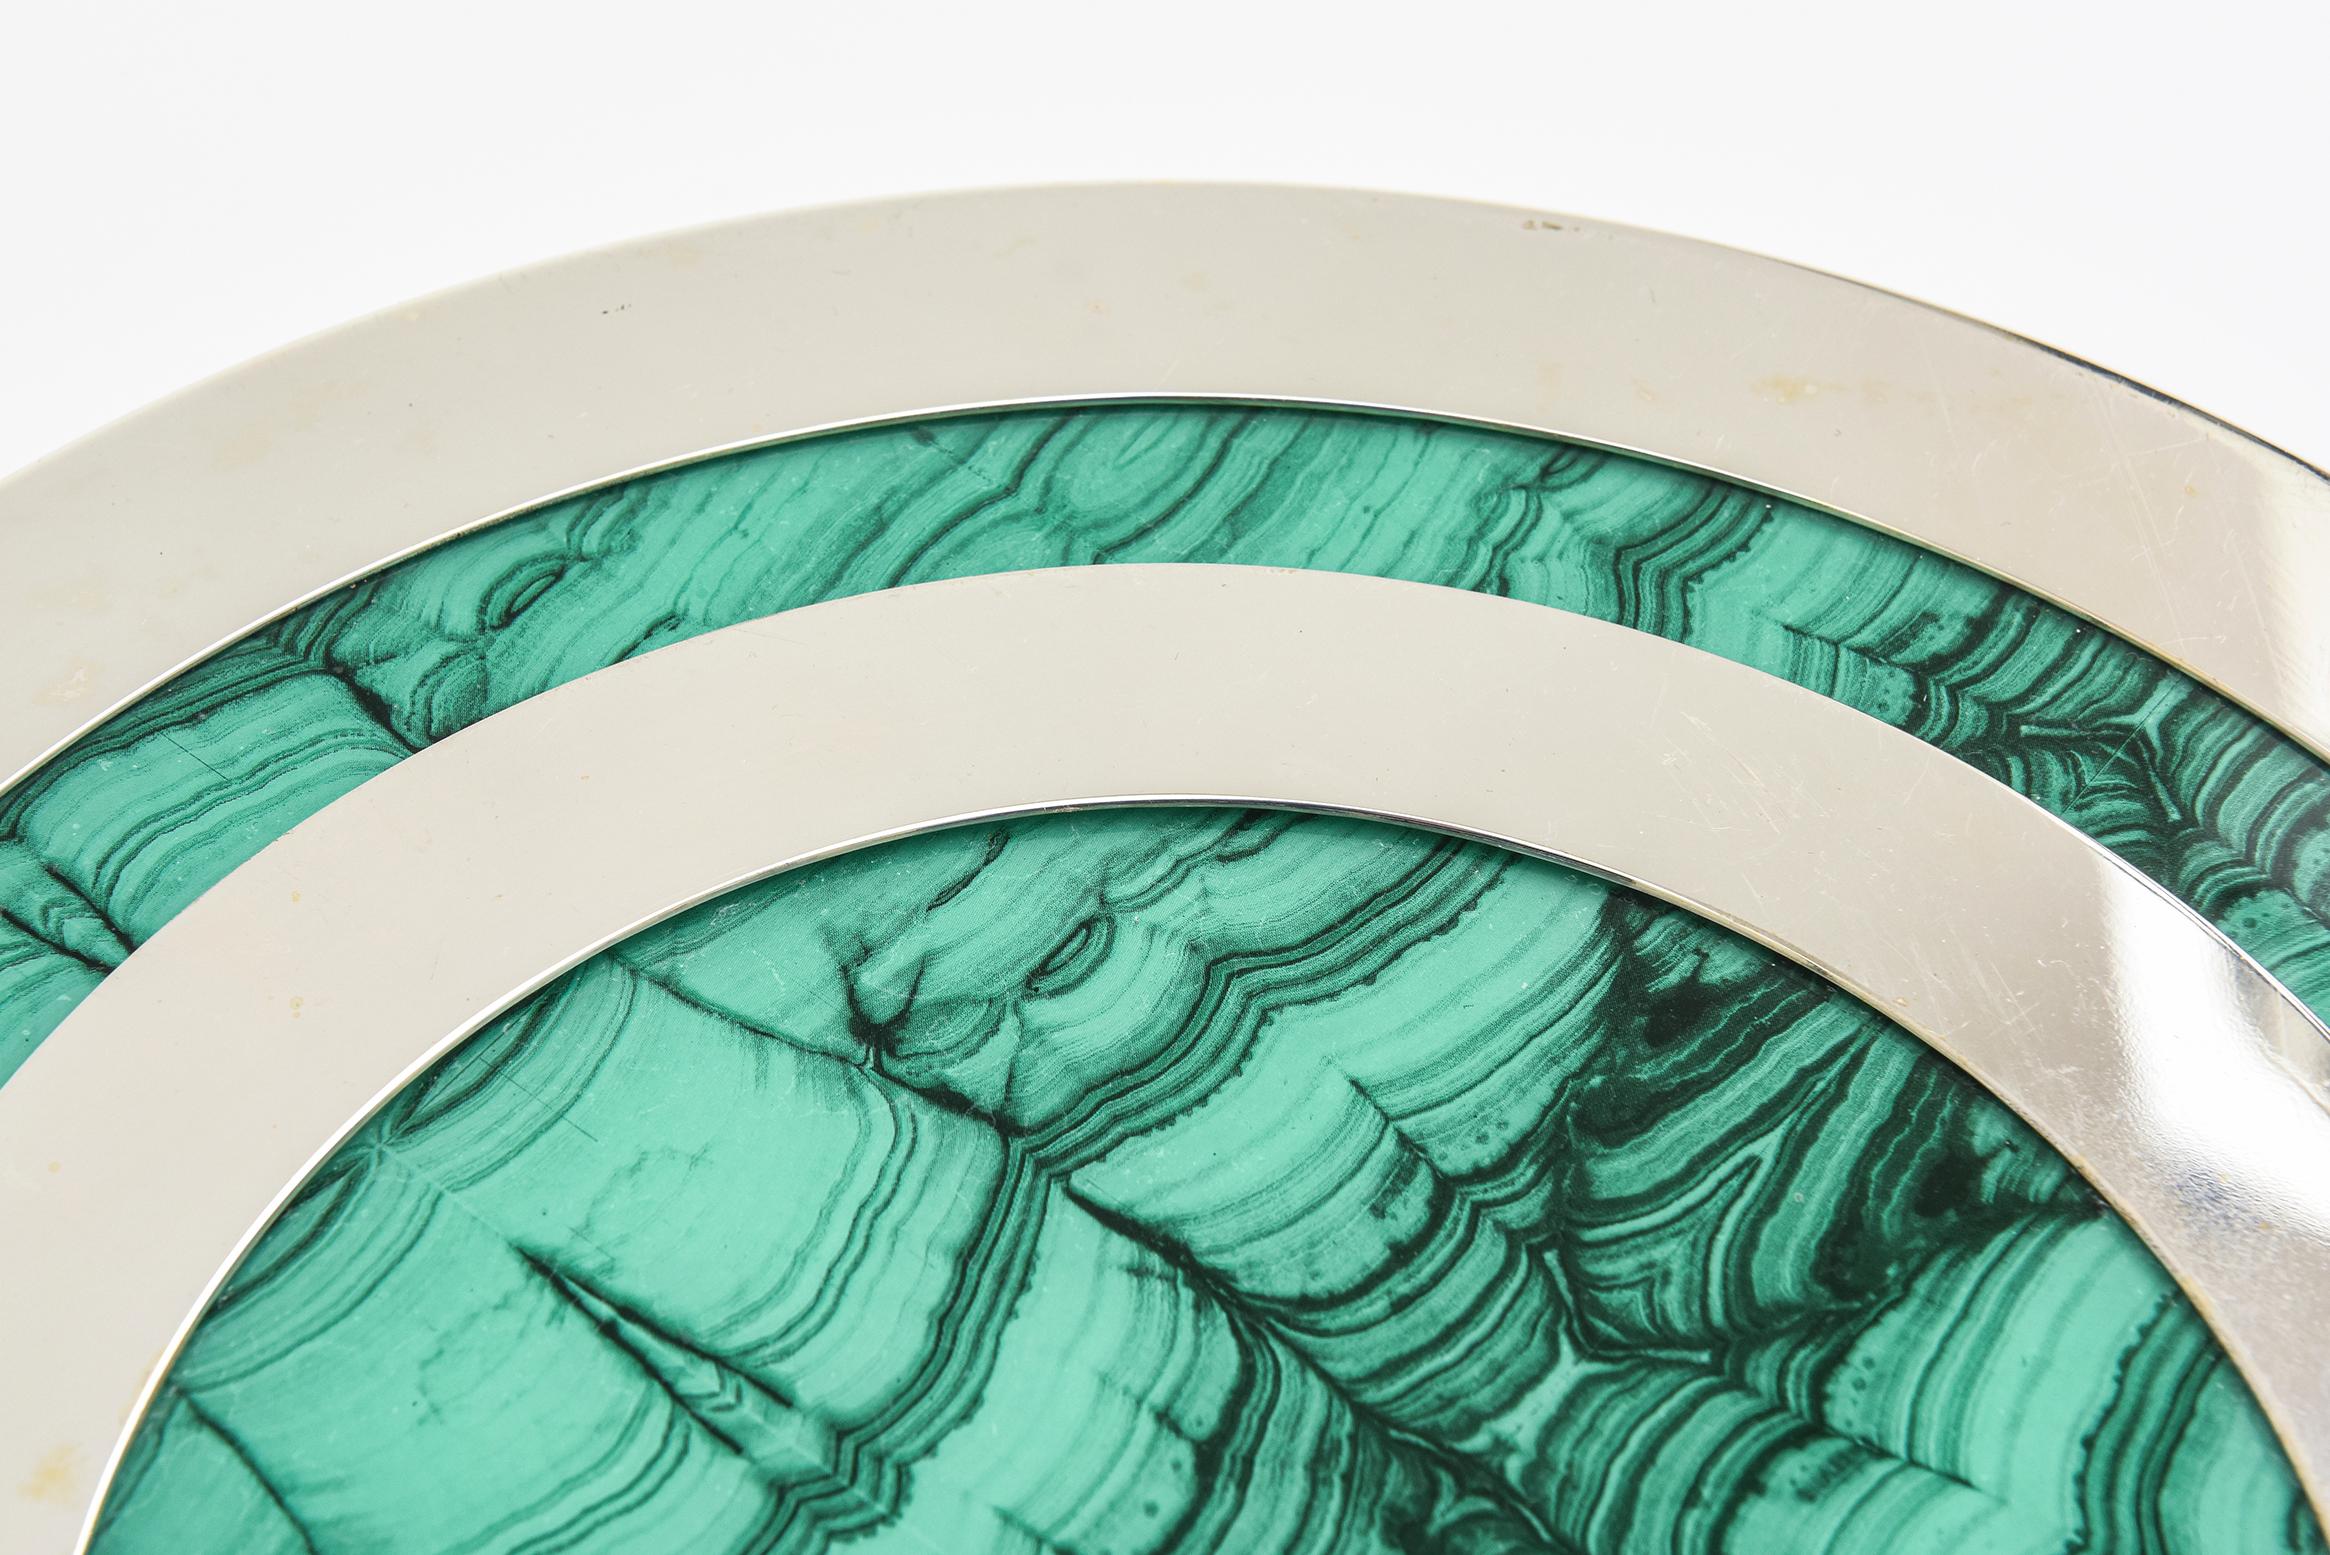  Vintage Malachite, Wood and Chrome Round Tray Barware For Sale 1